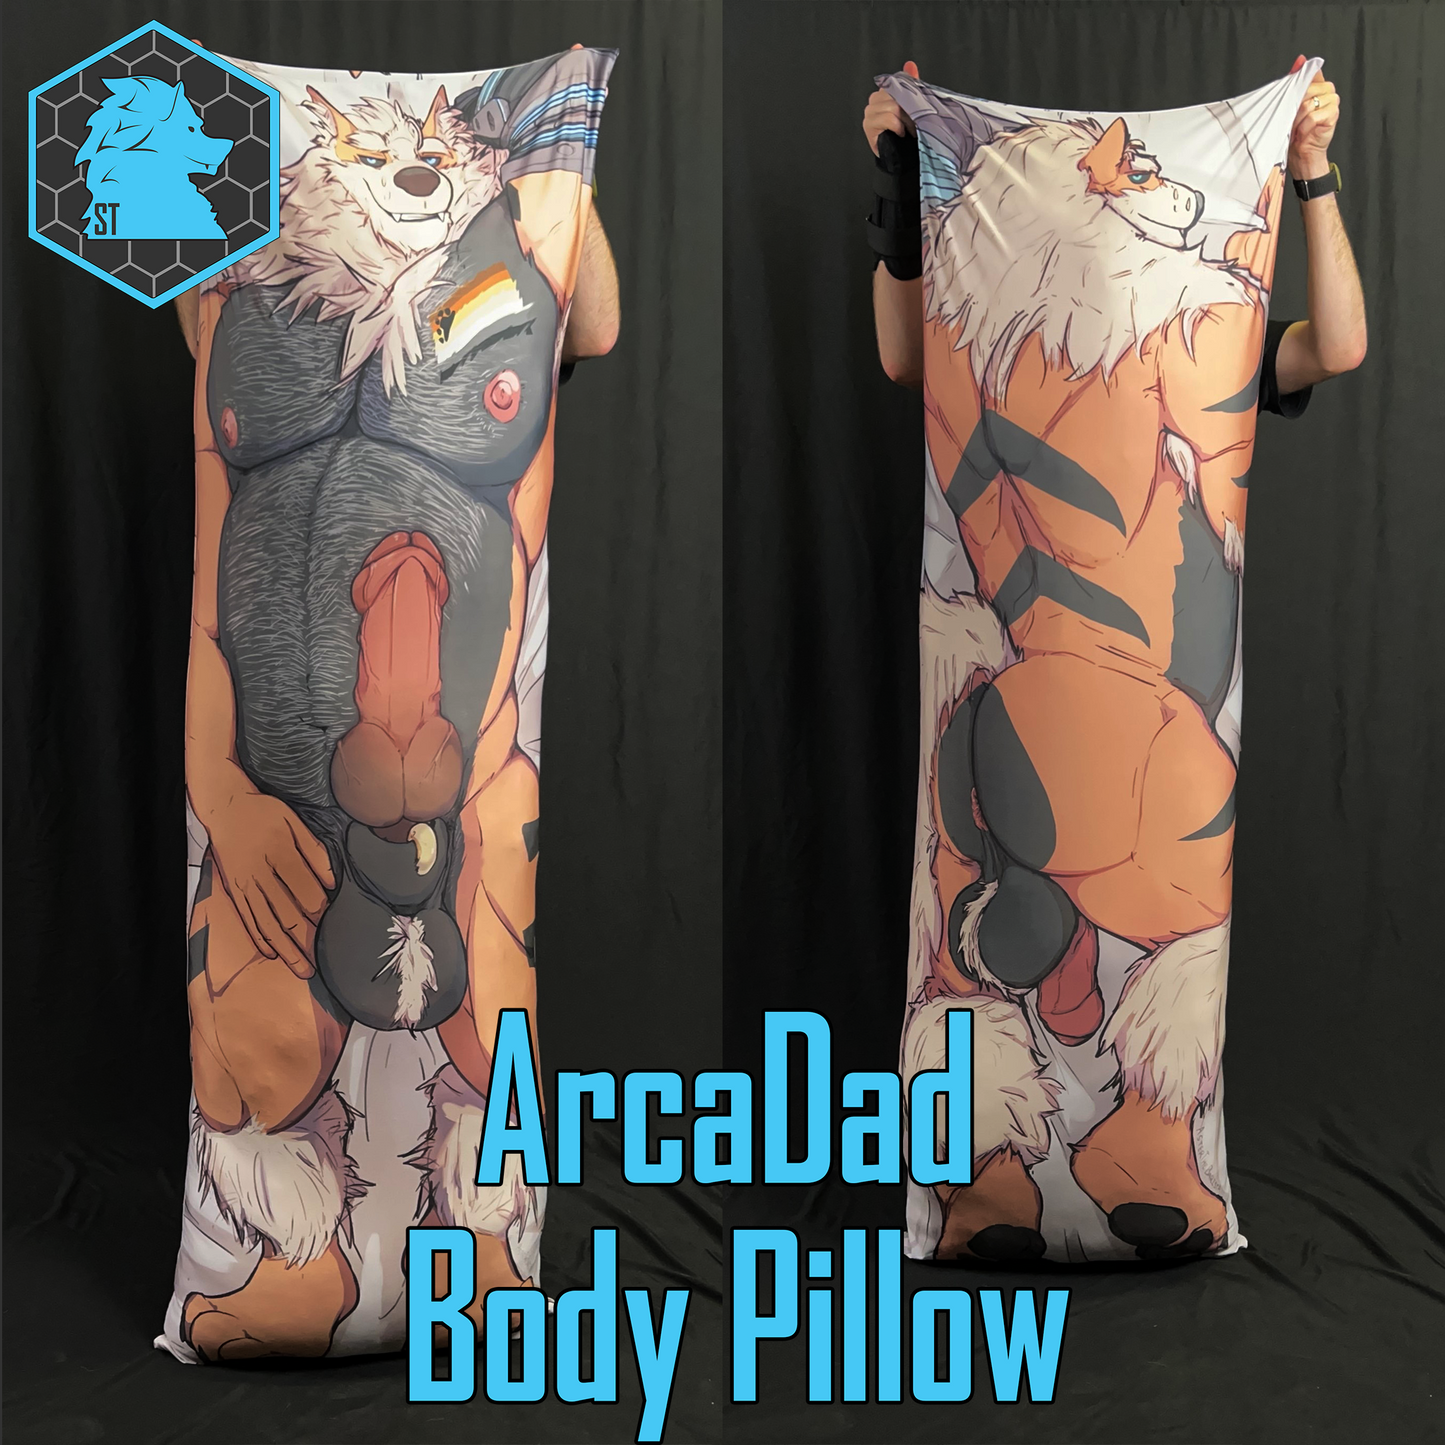 ArcaDad Body Pillow (Cover Only)